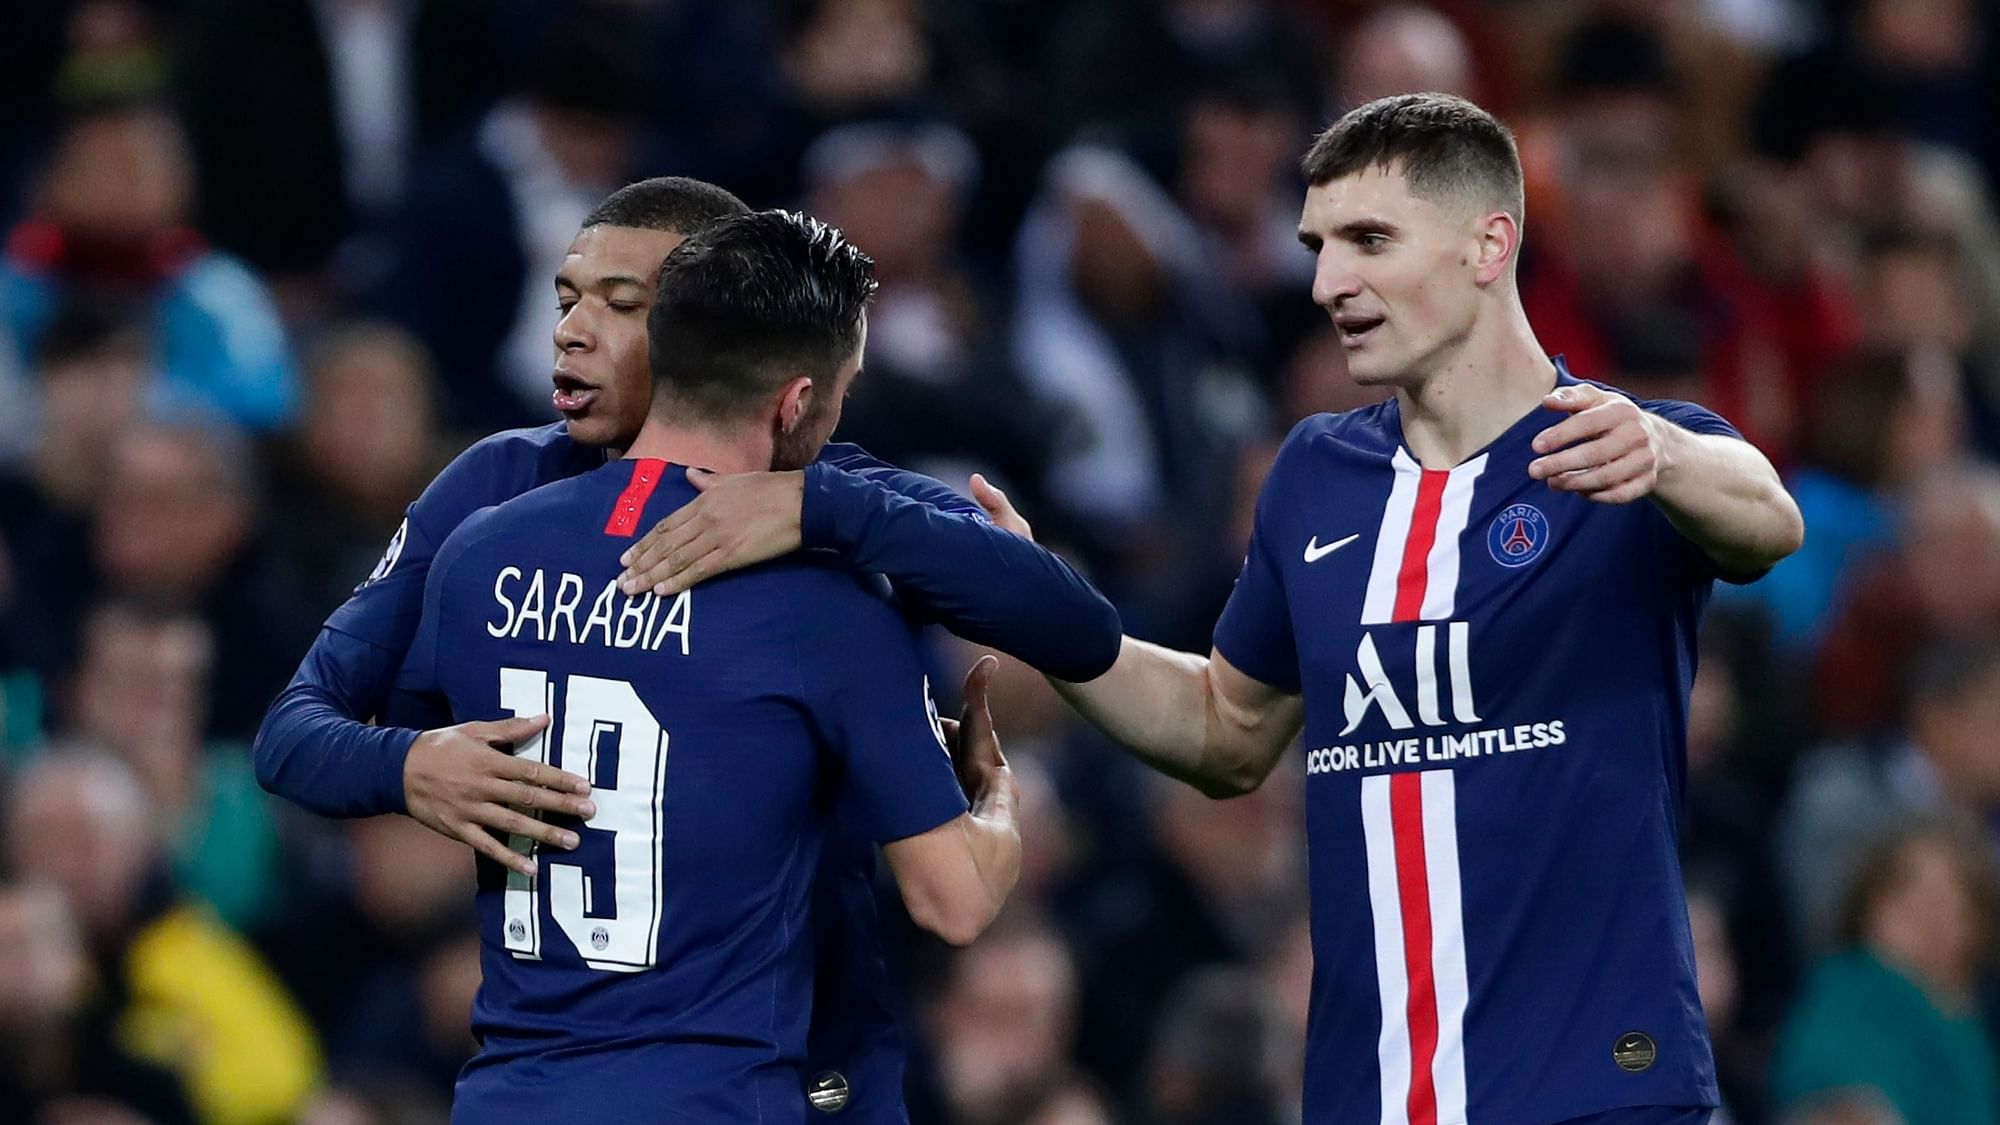 Paris Saint-Germain salvaged a 2-2 draw with Real Madrid to clinch first place in Group A of the Champions League.